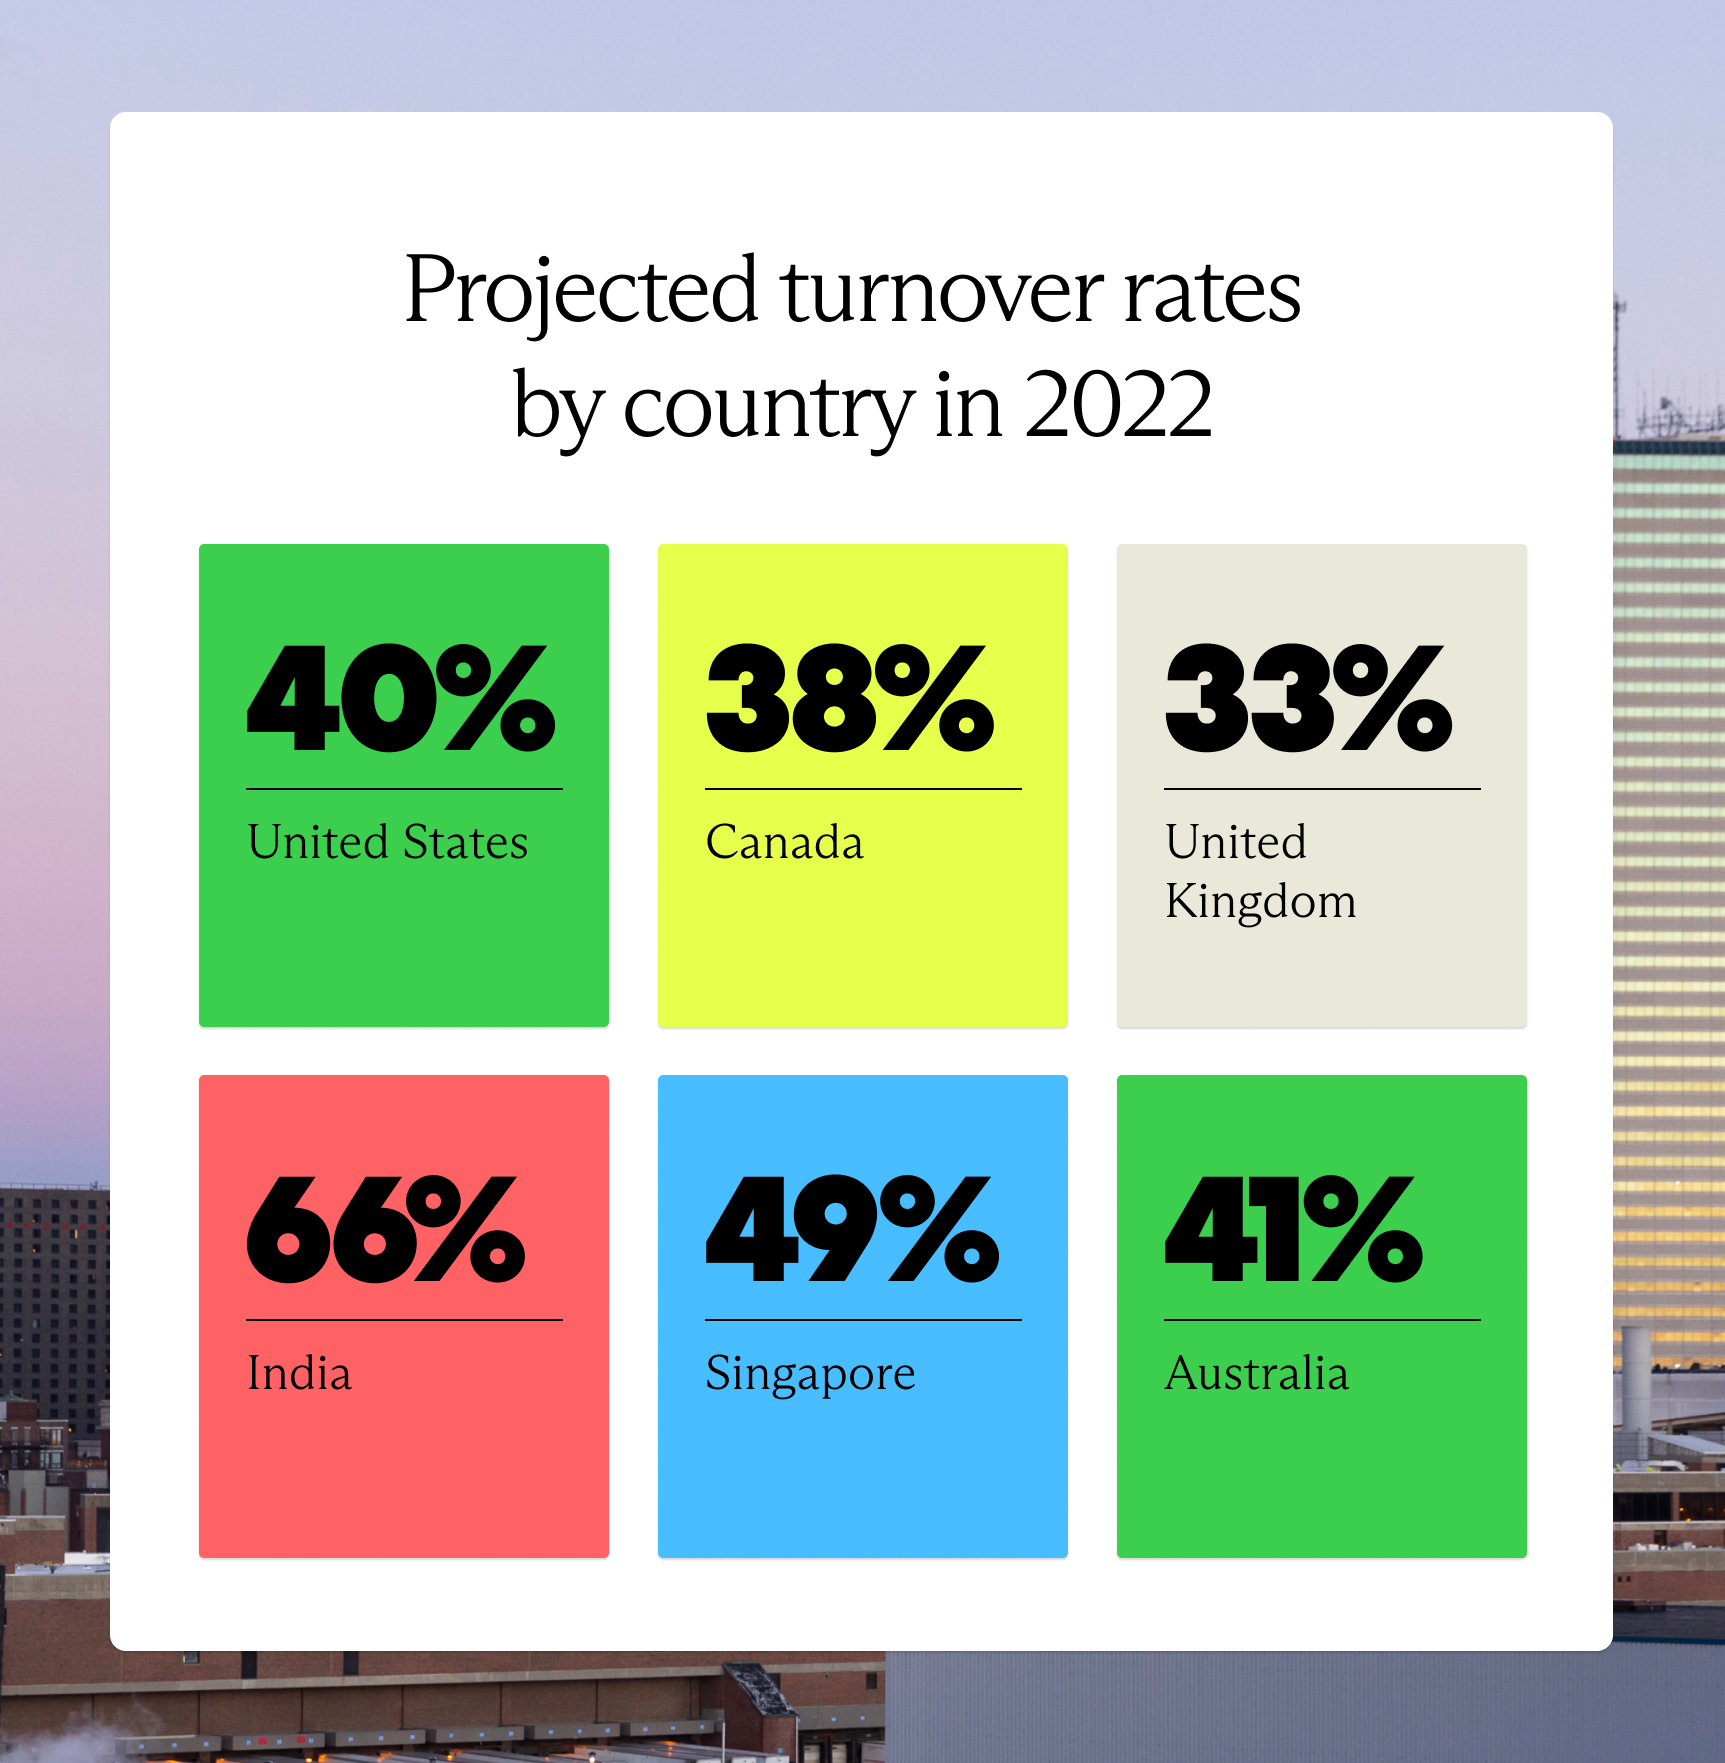 Projected turnover rates in 2022: 40% in the US, 38% in Canada, 33% in the UK, 66% ini India, 49% in Singapore, 41% in Australia